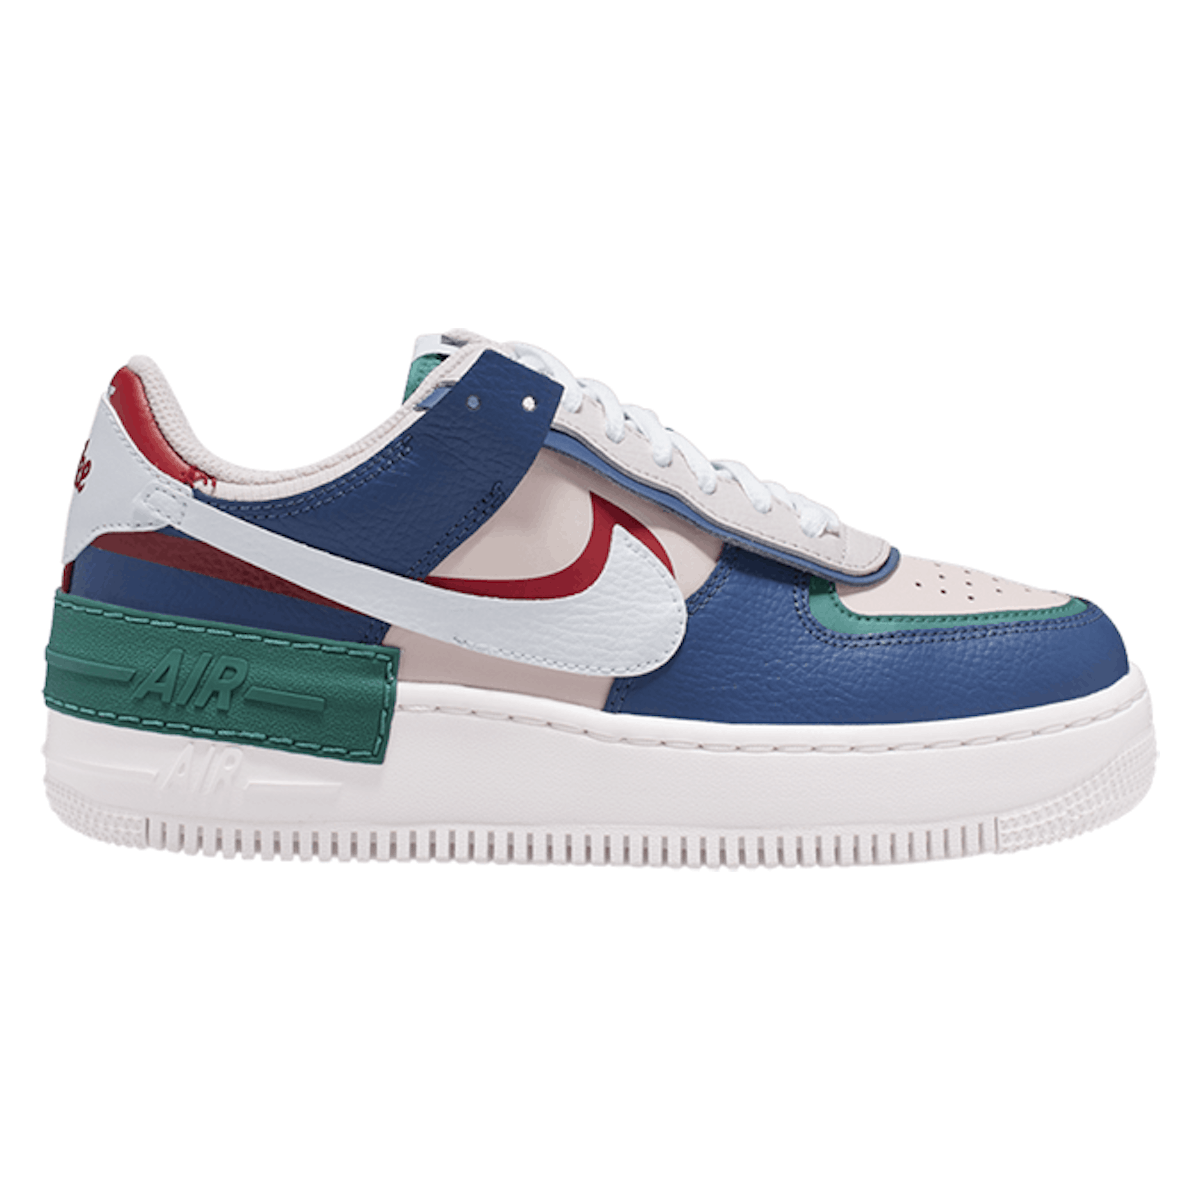 Nike WMNS Air Force 1 Low Shadow "Mystic Navy"